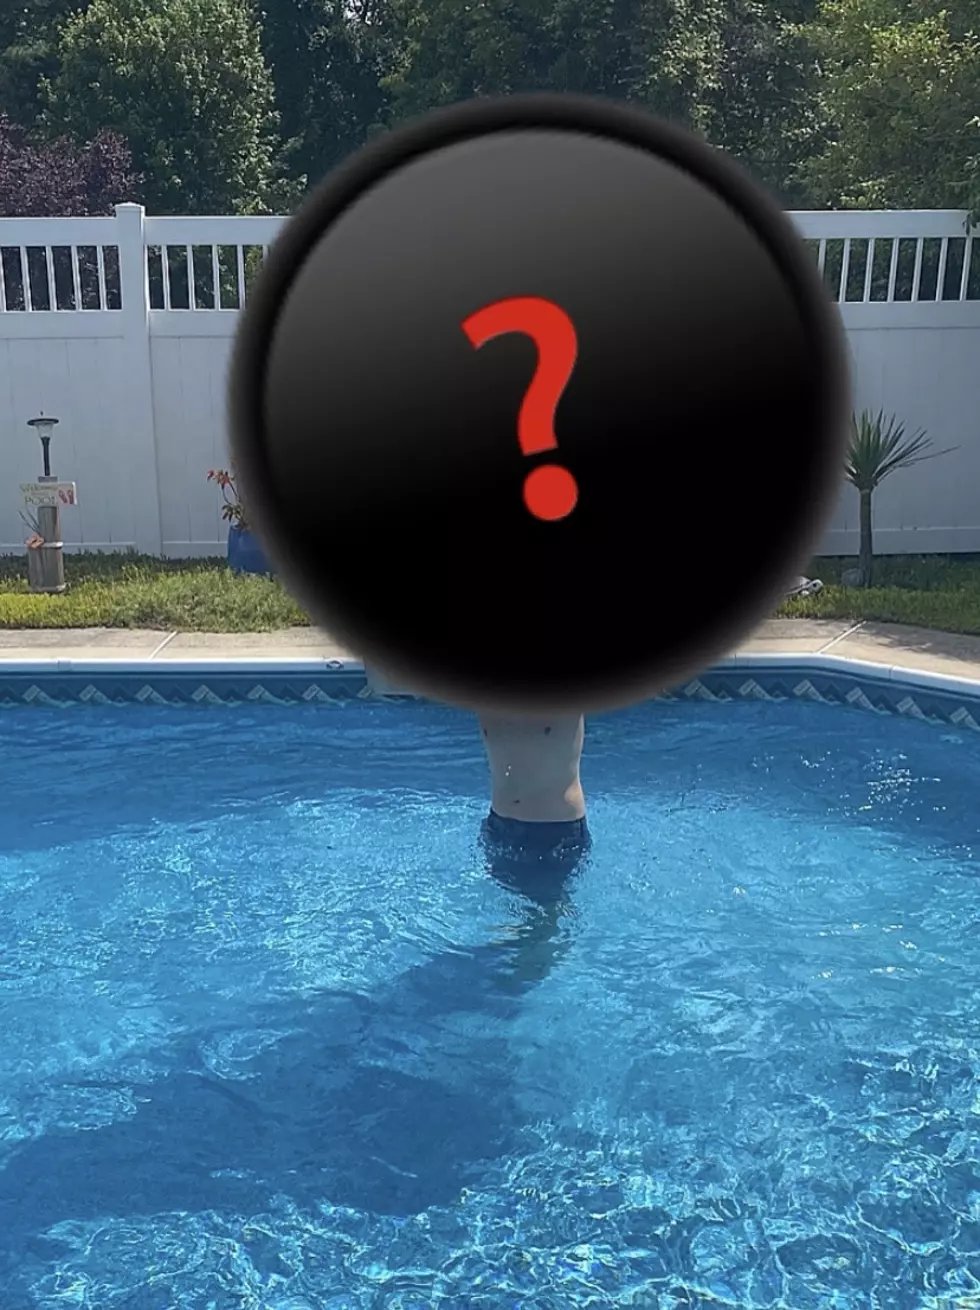 Is This The Best Pool Float In New Jersey?